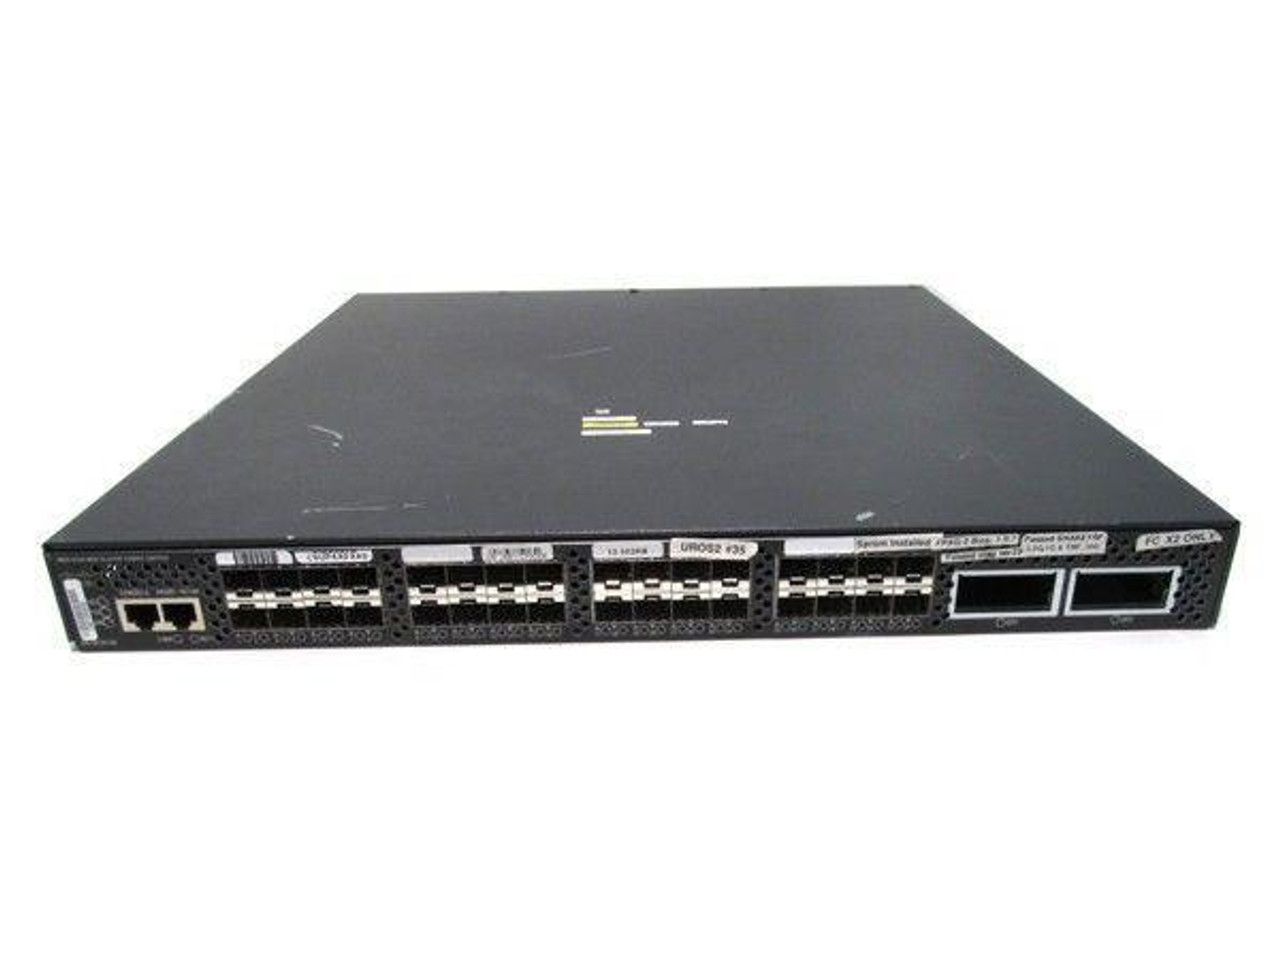 Cisco MDS 9134 Multilayer Fabric Fibre Channel Switch - 4.24 Gbit/s - 32 Fiber Channel Ports - 24 x Total Expansion Slots - Manageable -